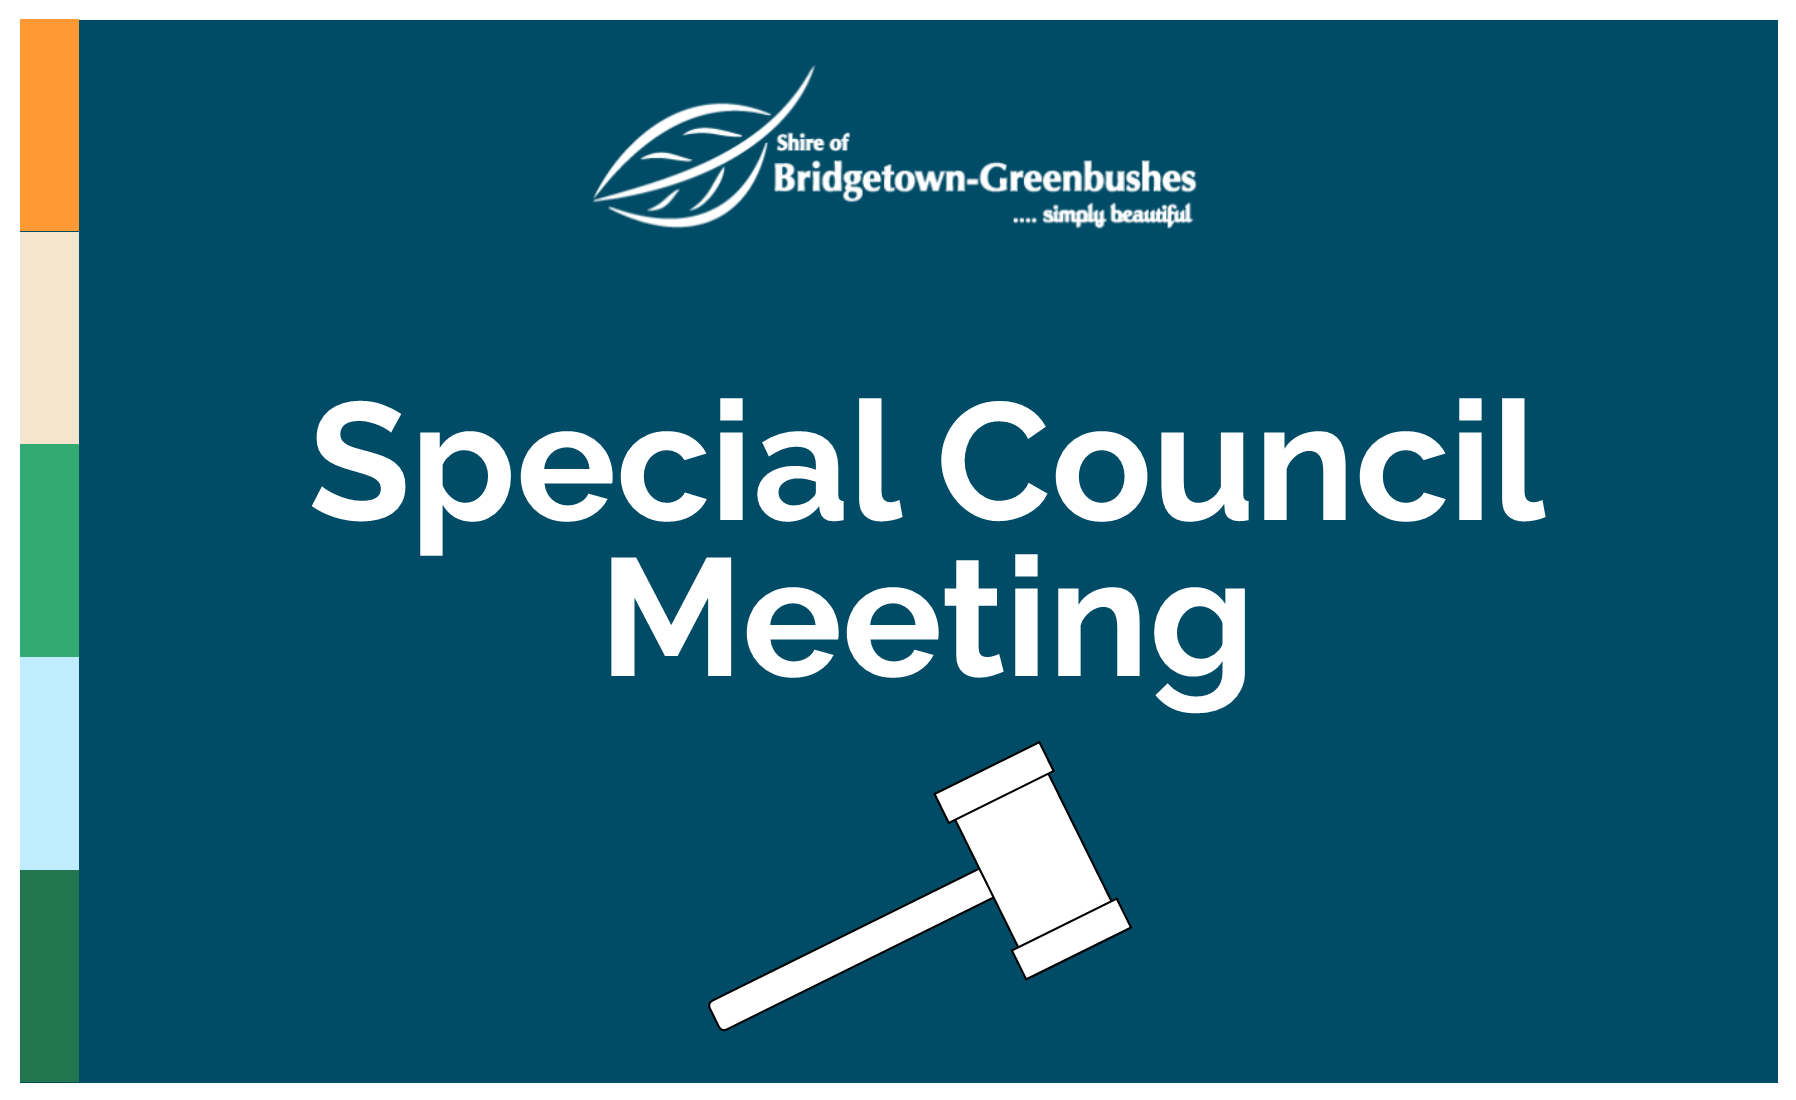 Special Council Meeting Details